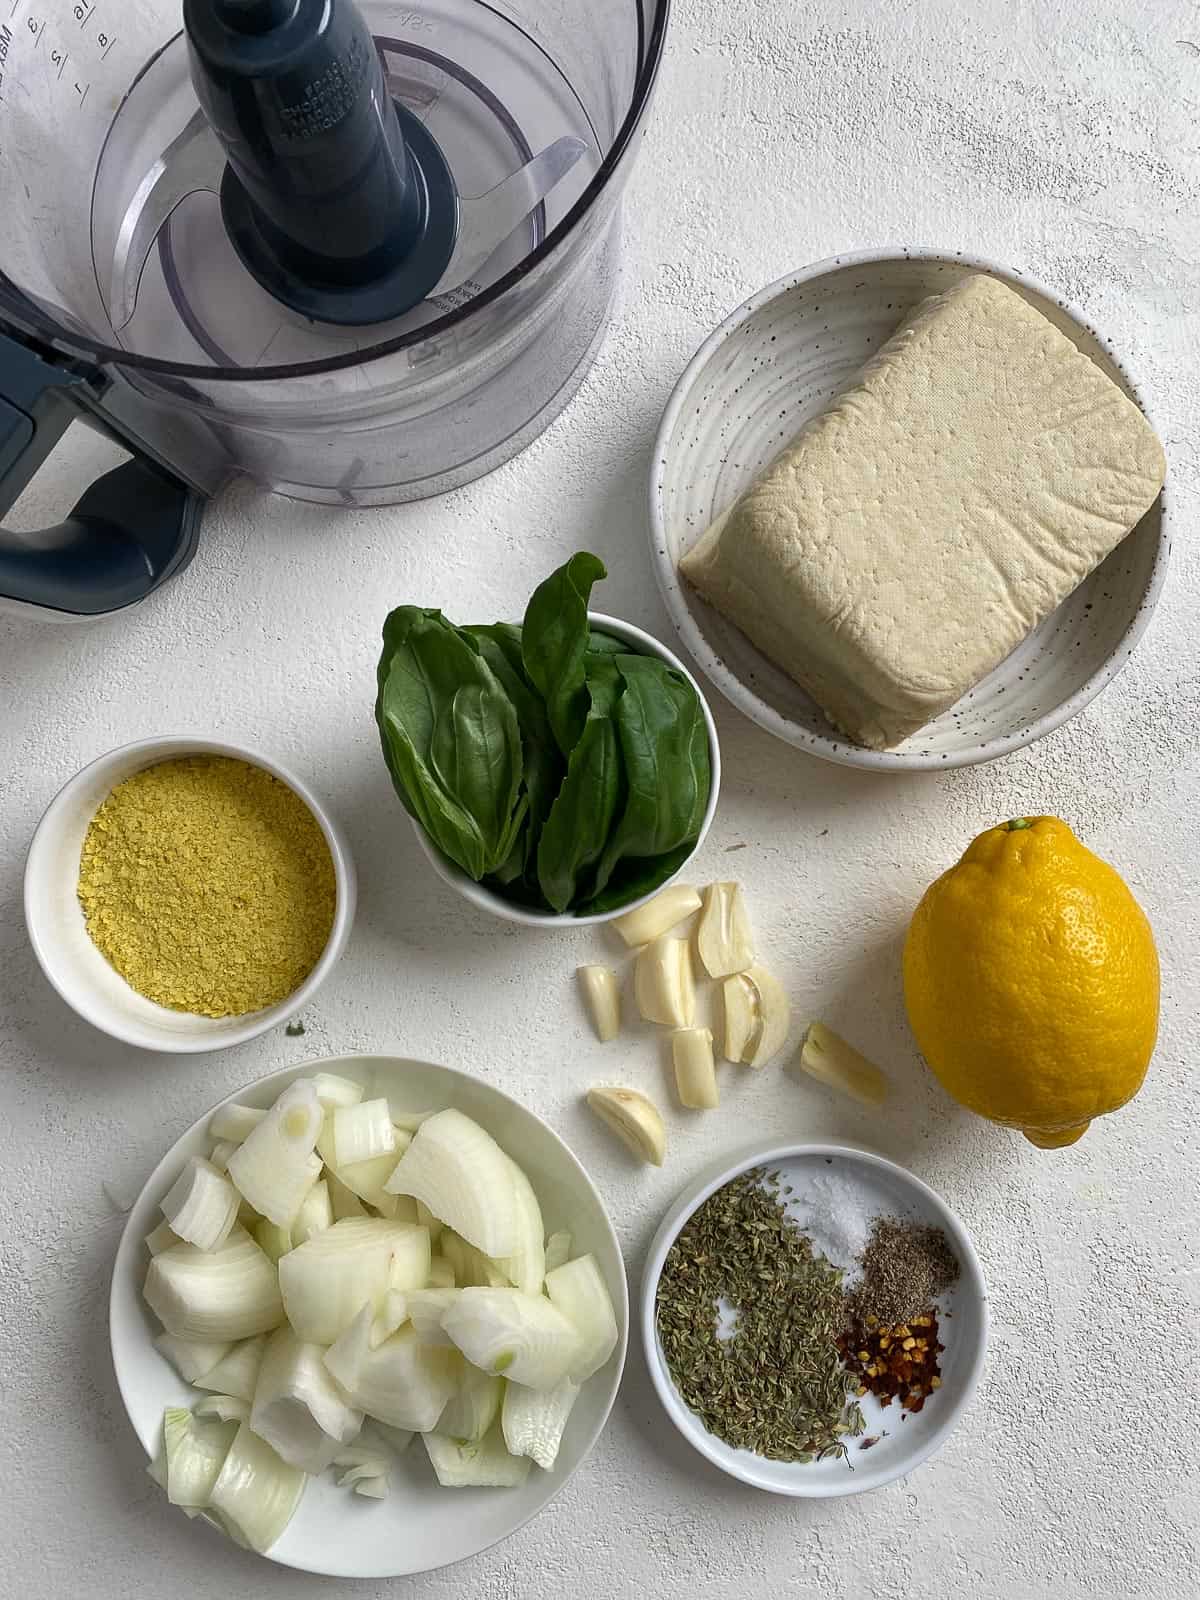 ingredients for Stuffed Shells against a white surface